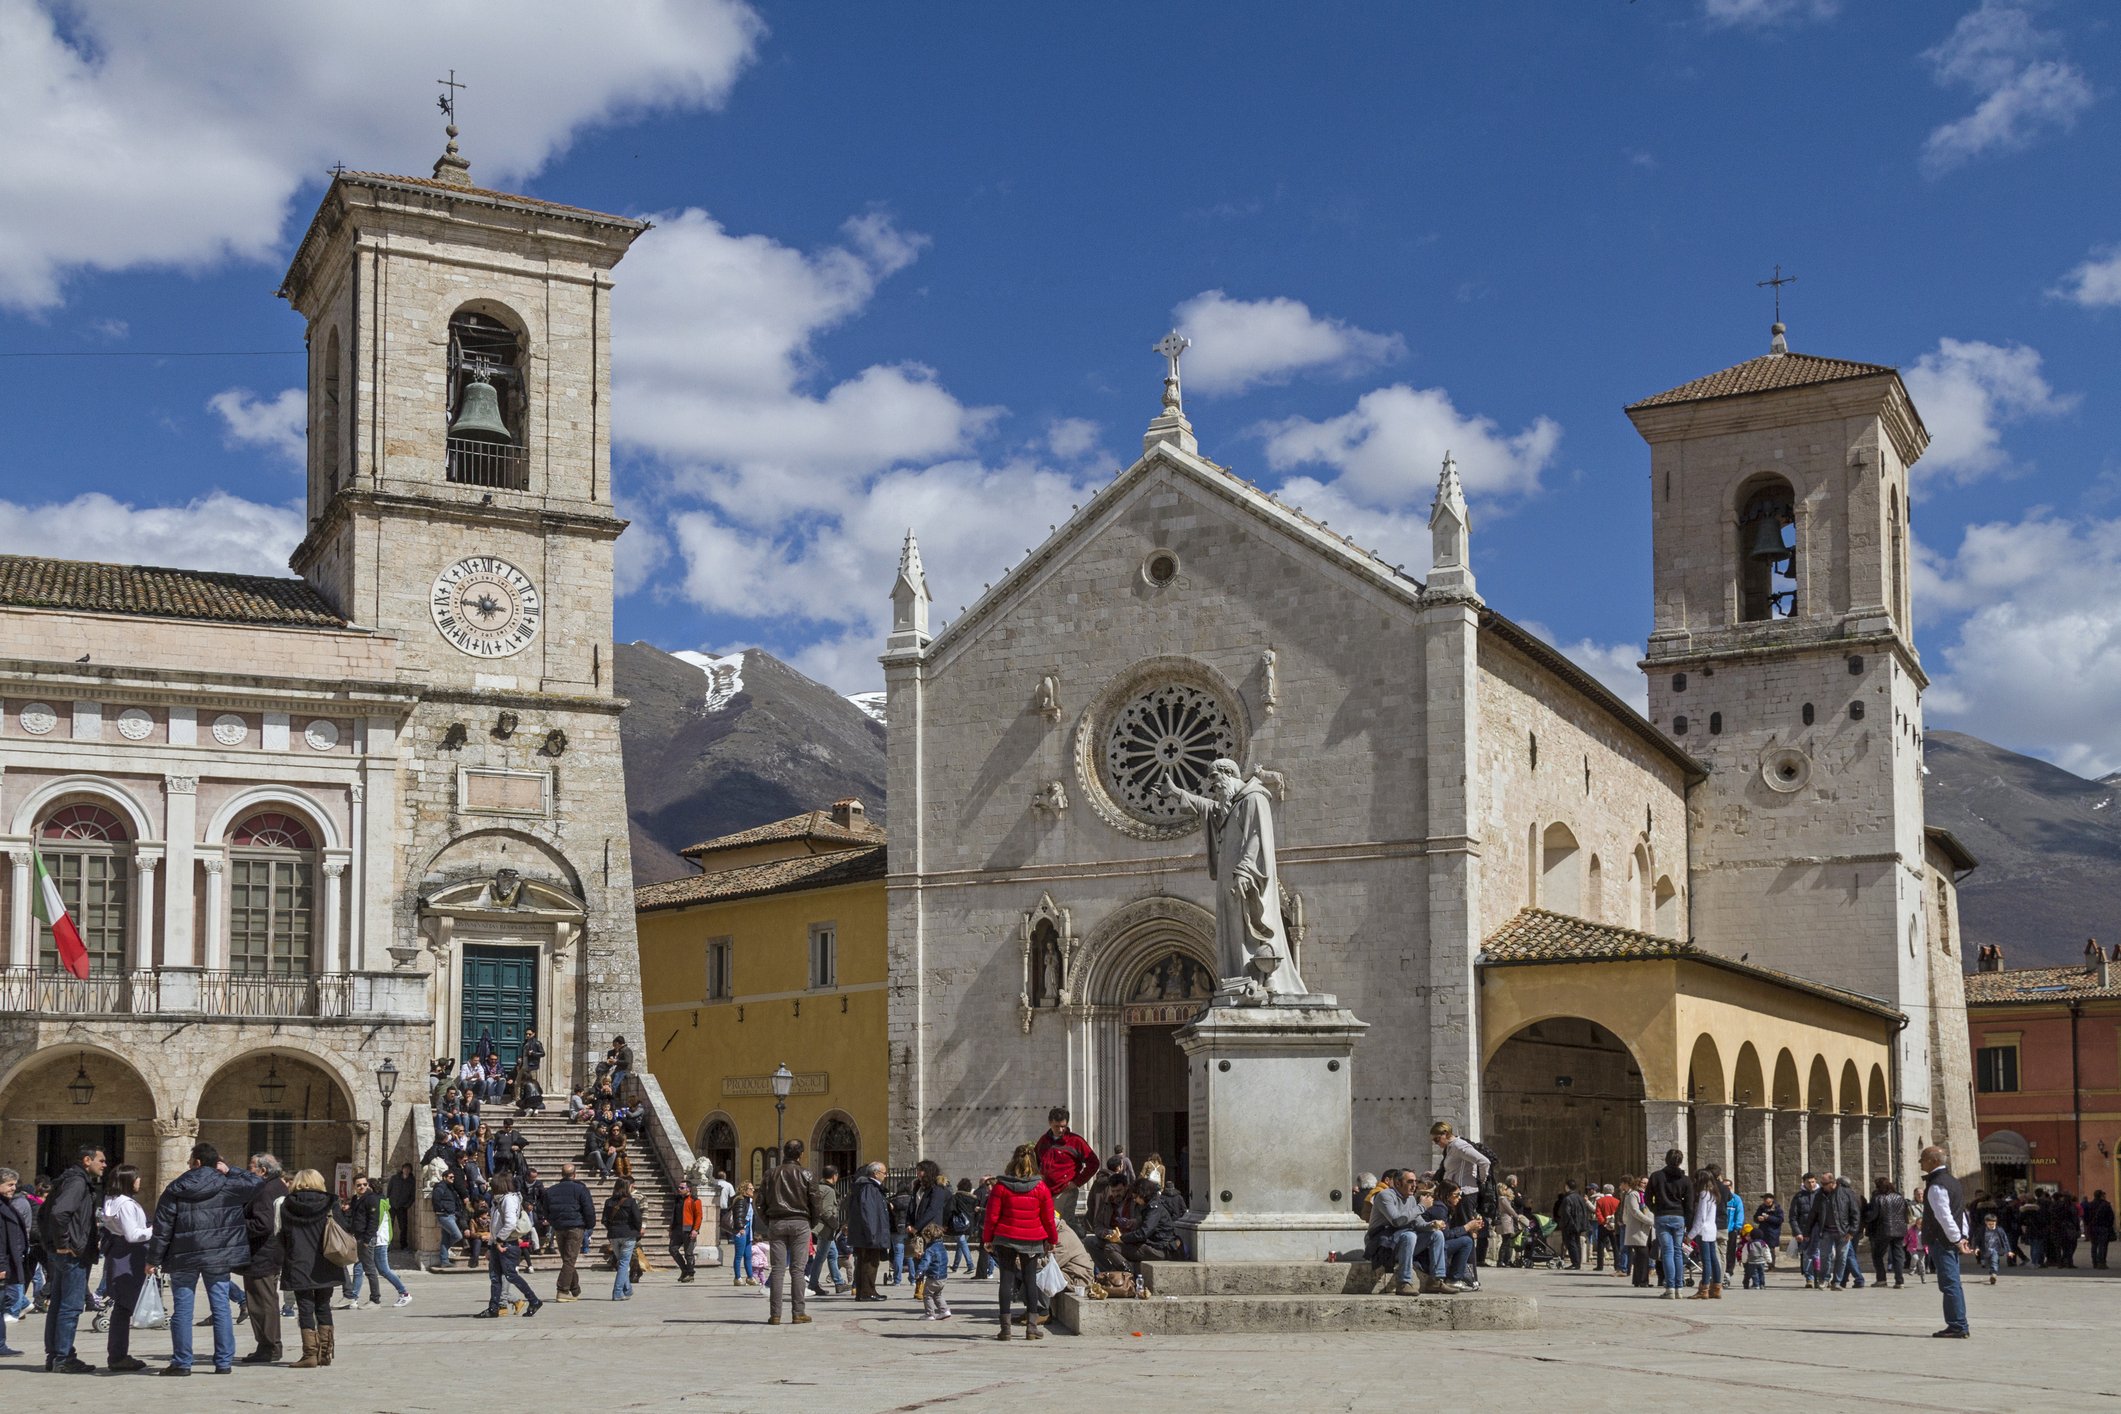 dreamstime_m_35974189 Norcia Piazza San Benedettoin by C Eder.jpg